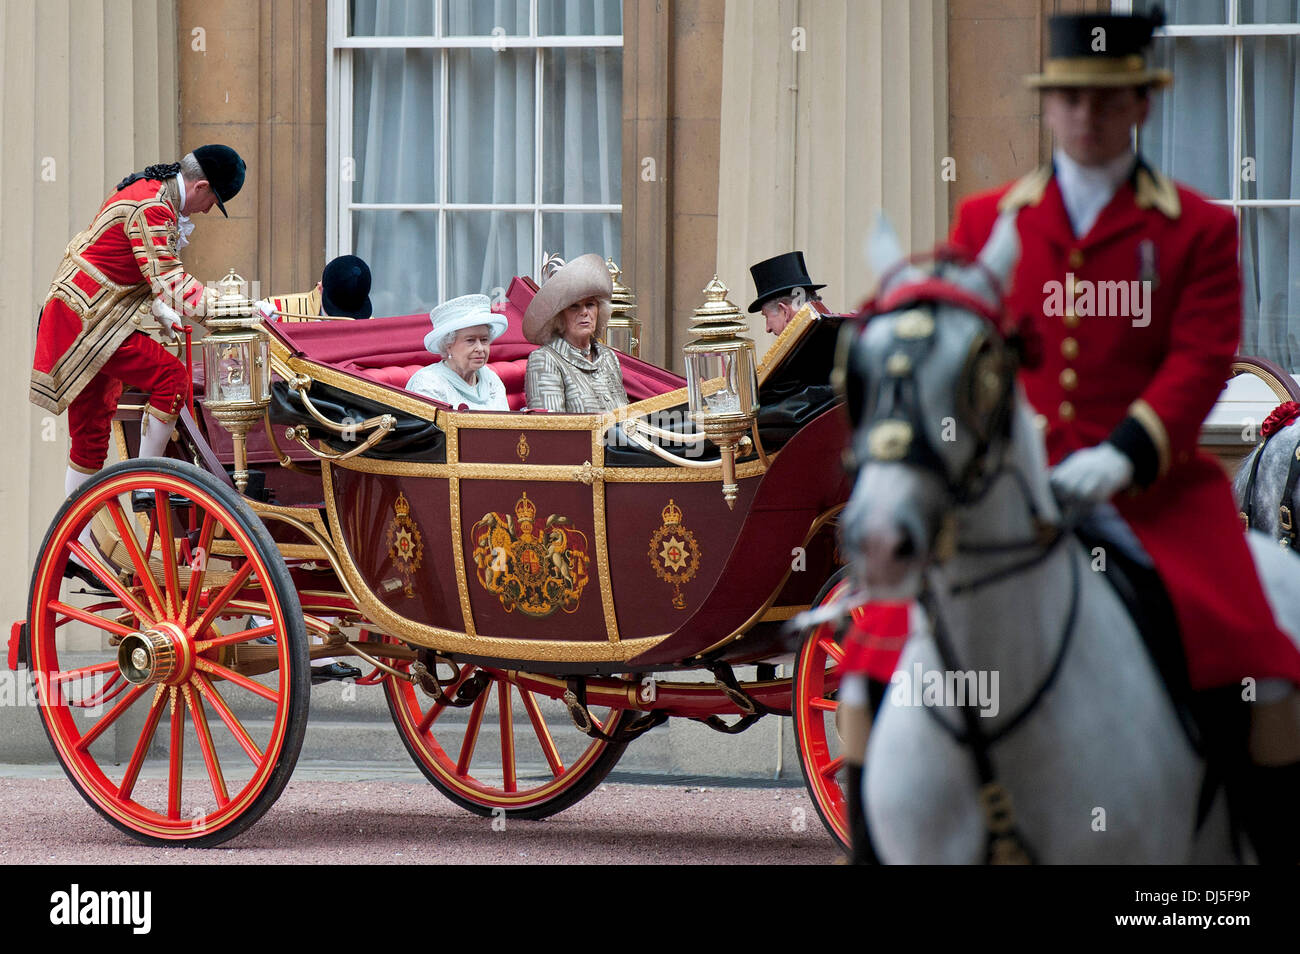 Footmen begin to dismount as Britain's Queen Elizabeth II, Camilla, Duchess of Cornwall, and Prince Charles, Prince of Wales, arrive at Buckingham Palace in the 1902 State Landau coach during a carriage procession from Westminster Hall to Buckingham Palac Stock Photo